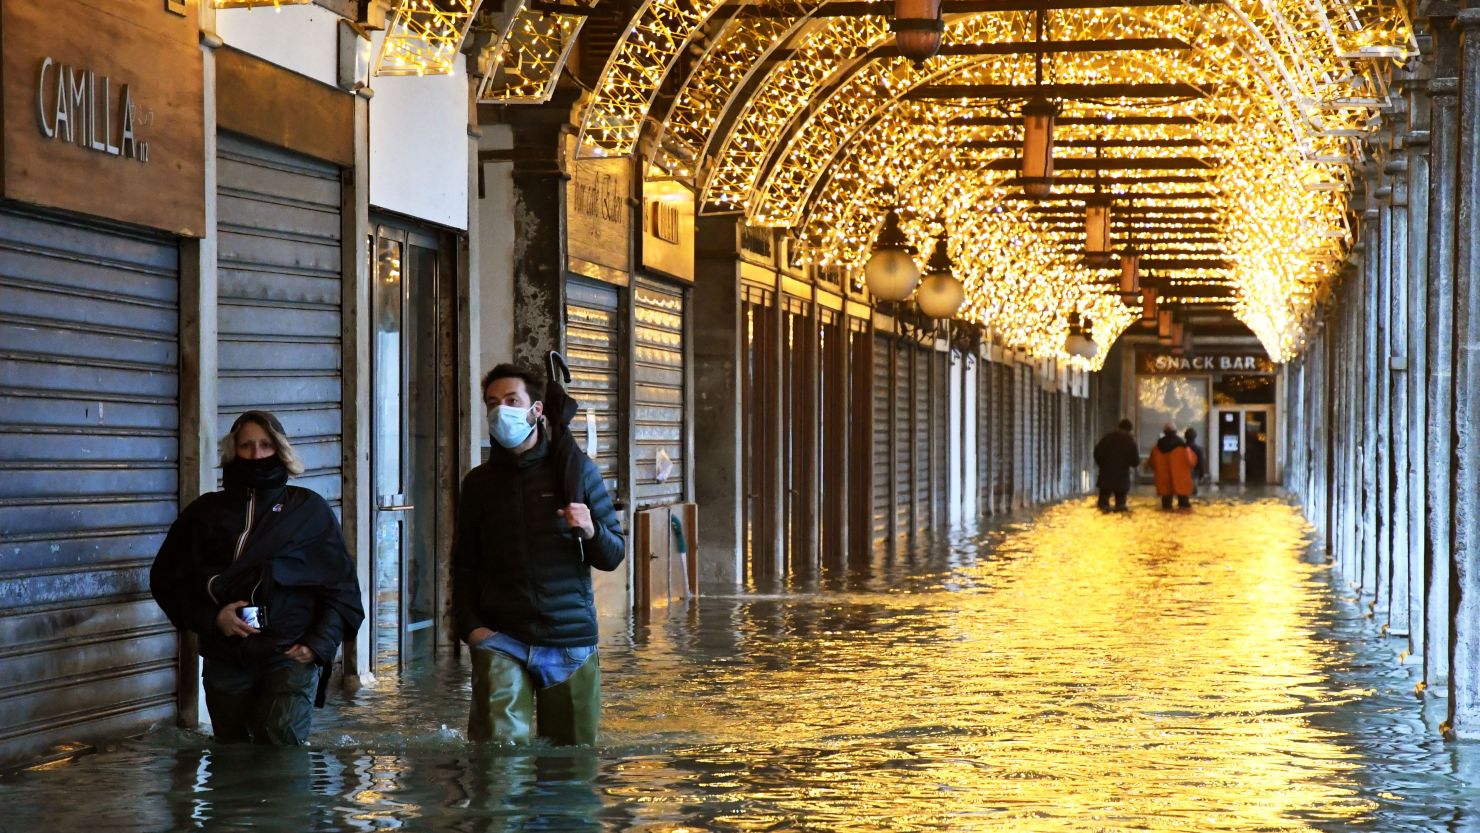 Venice was flooded on December 8, 2020 after the MOSE flood barriers were not activated